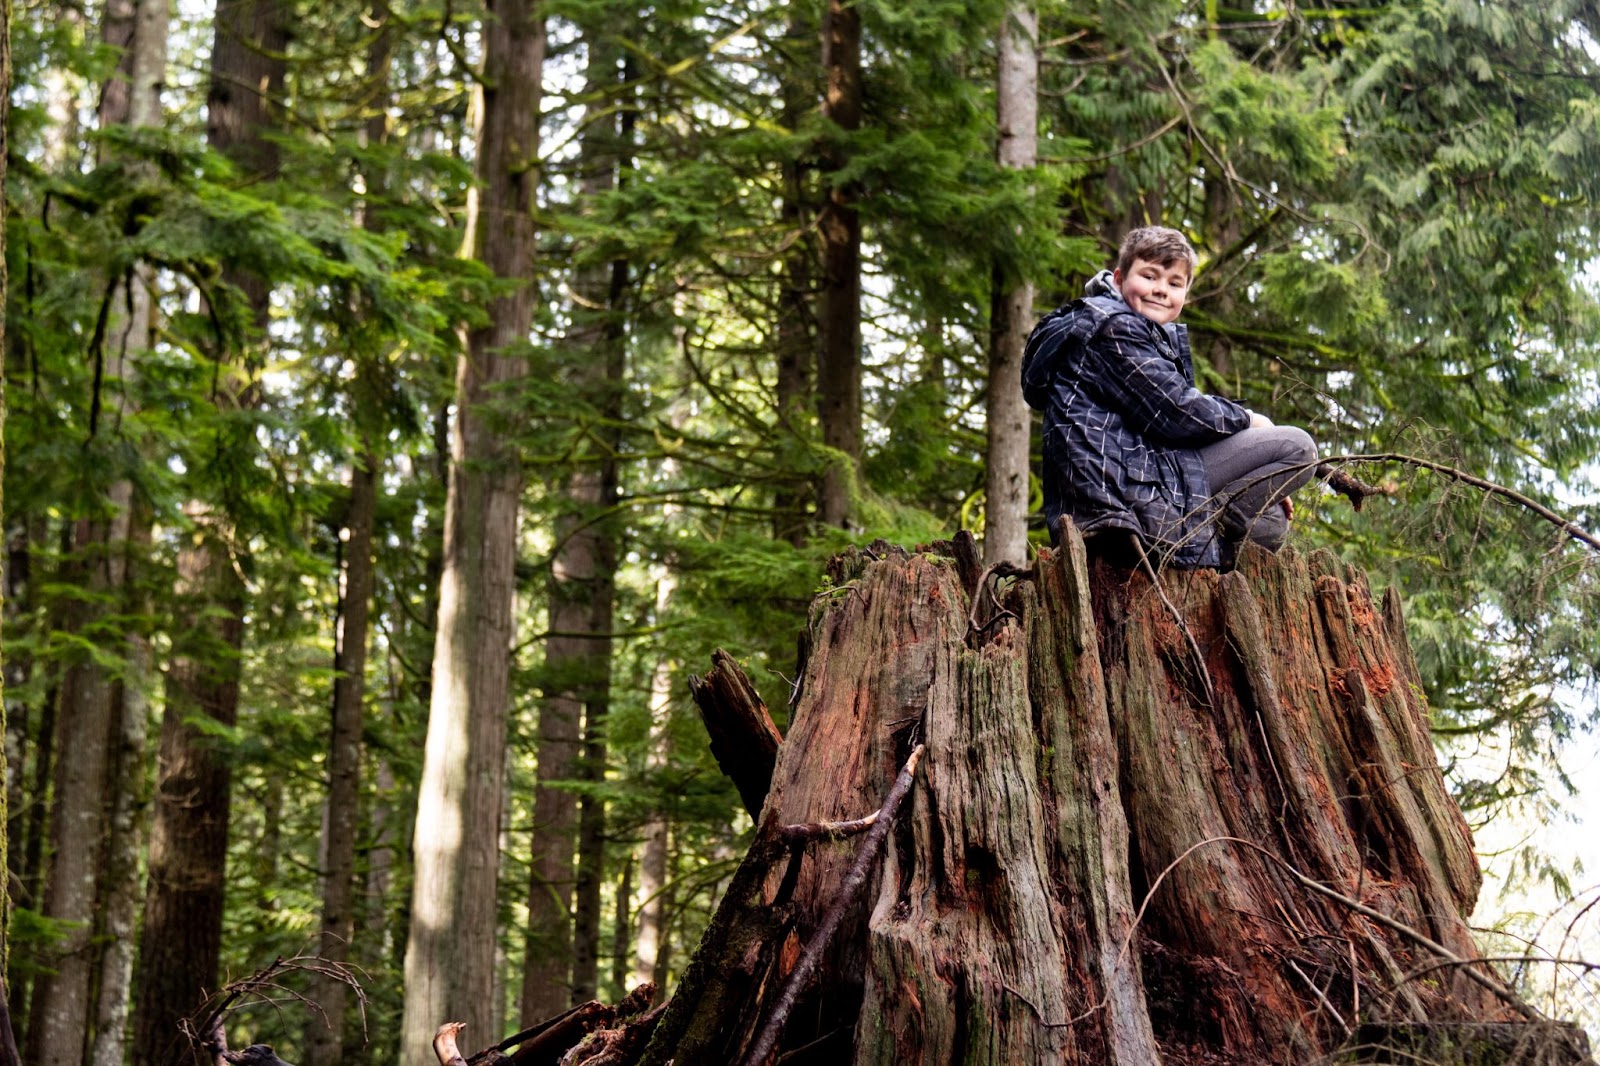 A young man sits on the remains of an old growth forest stump in the middle of a forest.